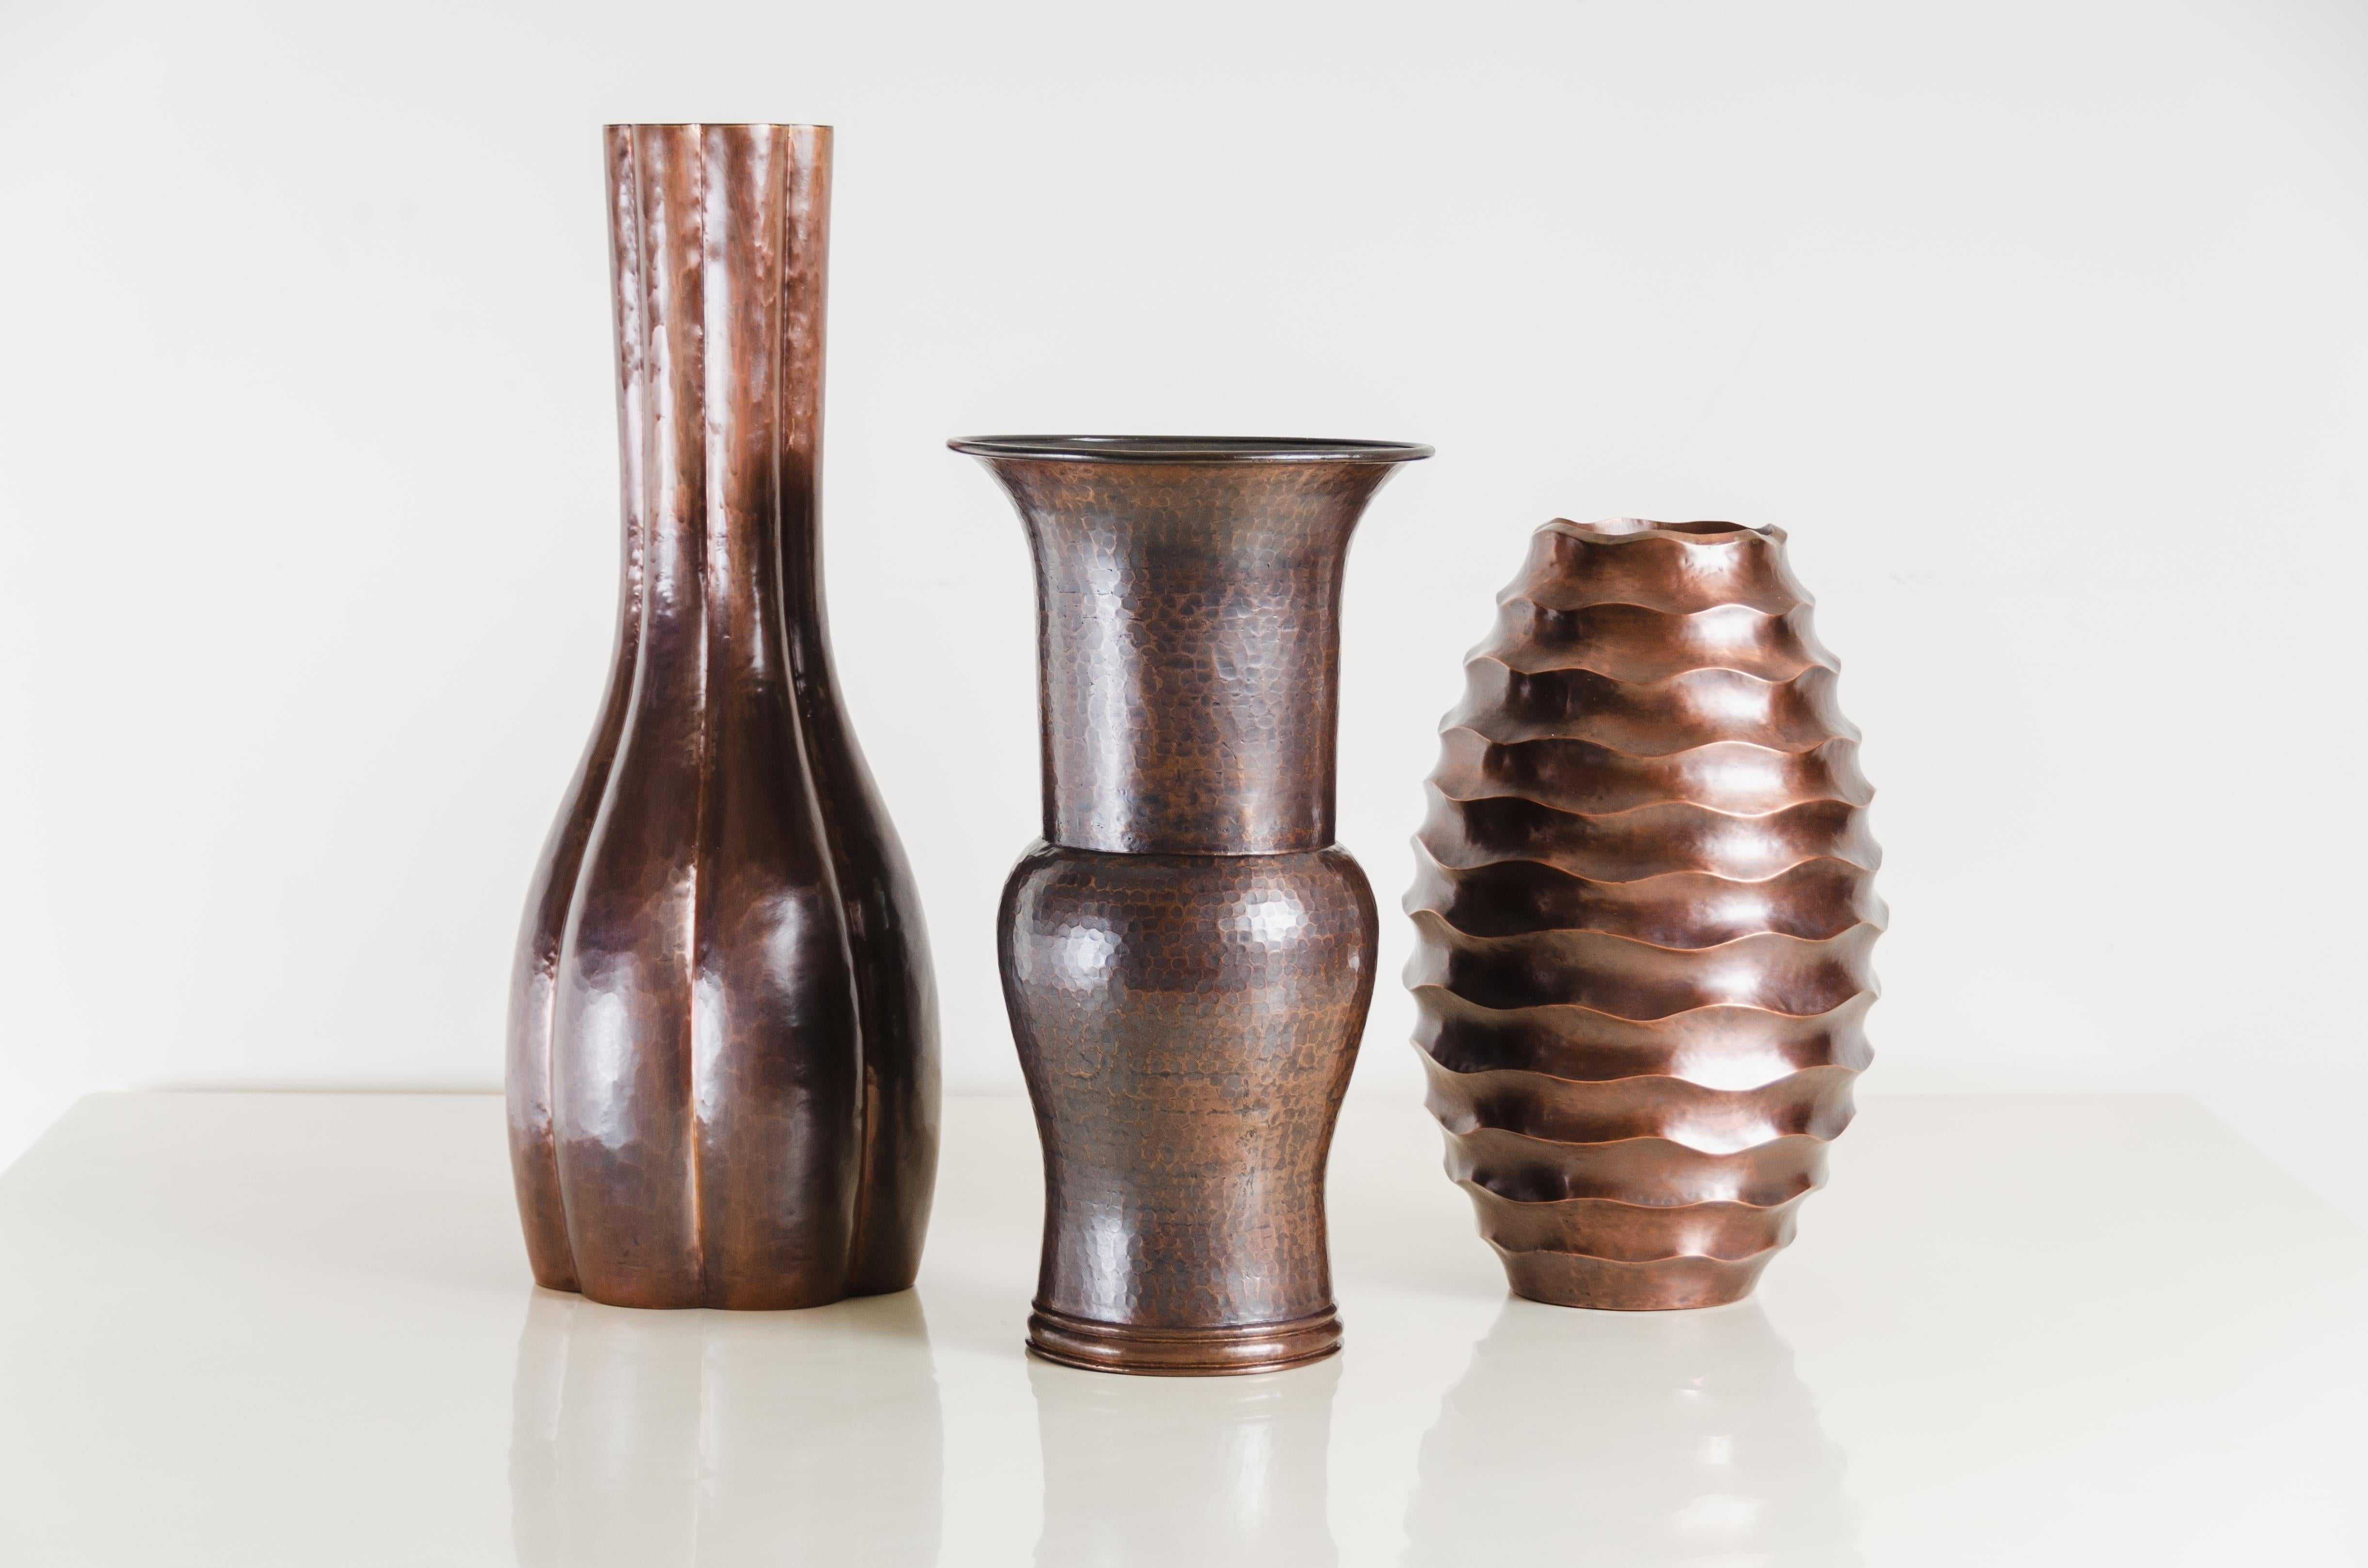 Contemporary Ola Vase, Antique Copper by Robert Kuo, Hand Repousse, Limited Edition For Sale